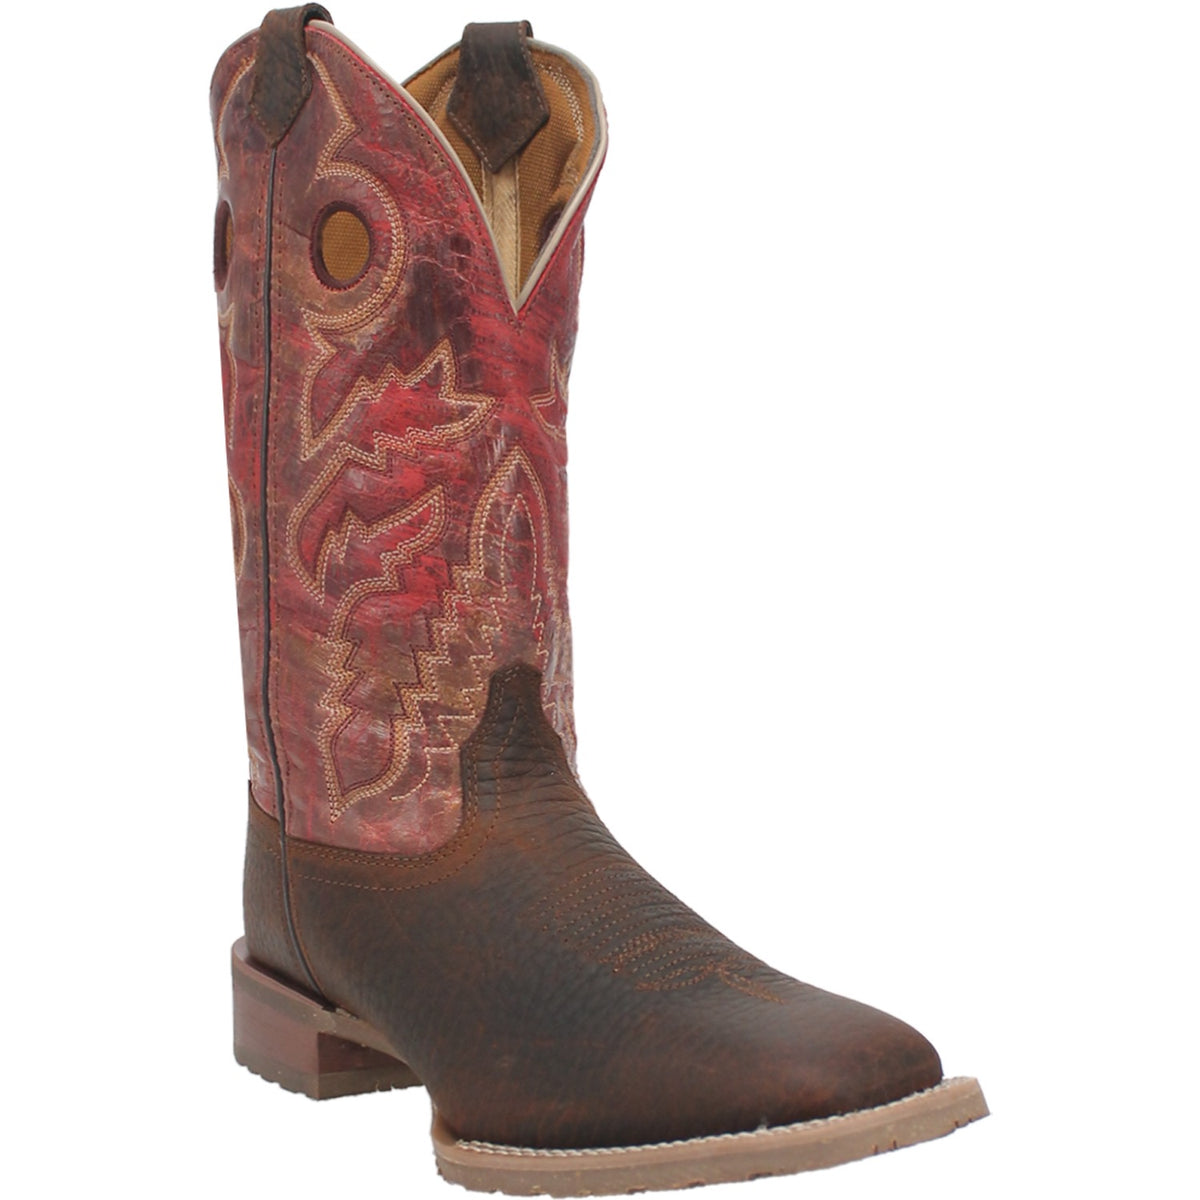 KOSAR LEATHER BOOT Cover